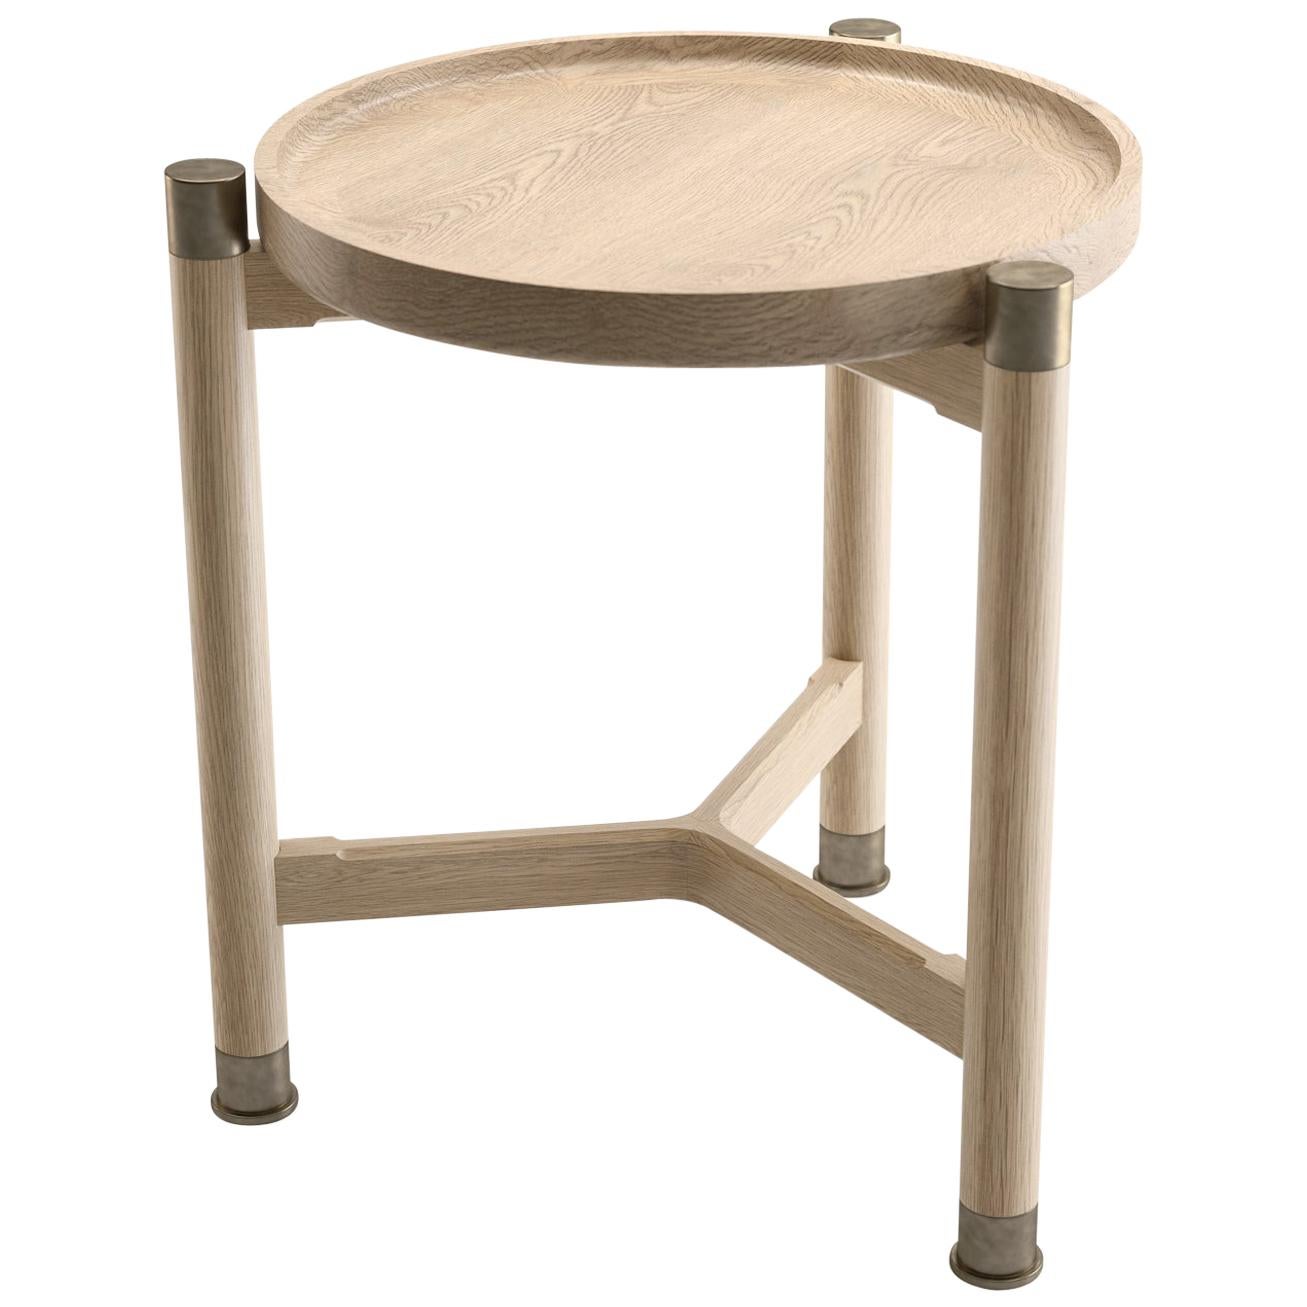 Otto Round Accent Table in Oak with Antique Brass Fittings For Sale